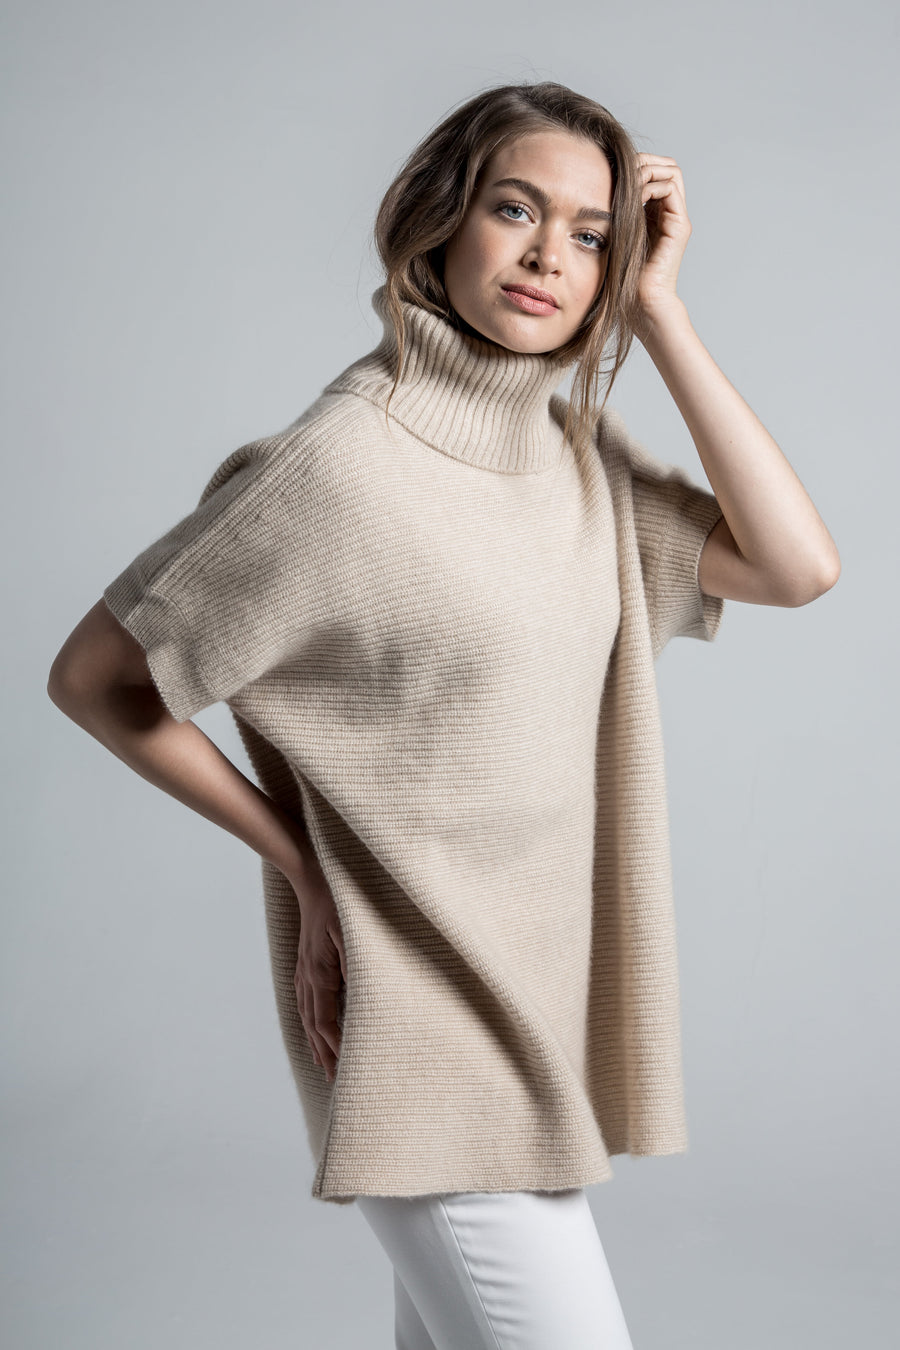 womens claire chunky knit oversized 100% pure organic cashmere turtleneck sweater in tan beige